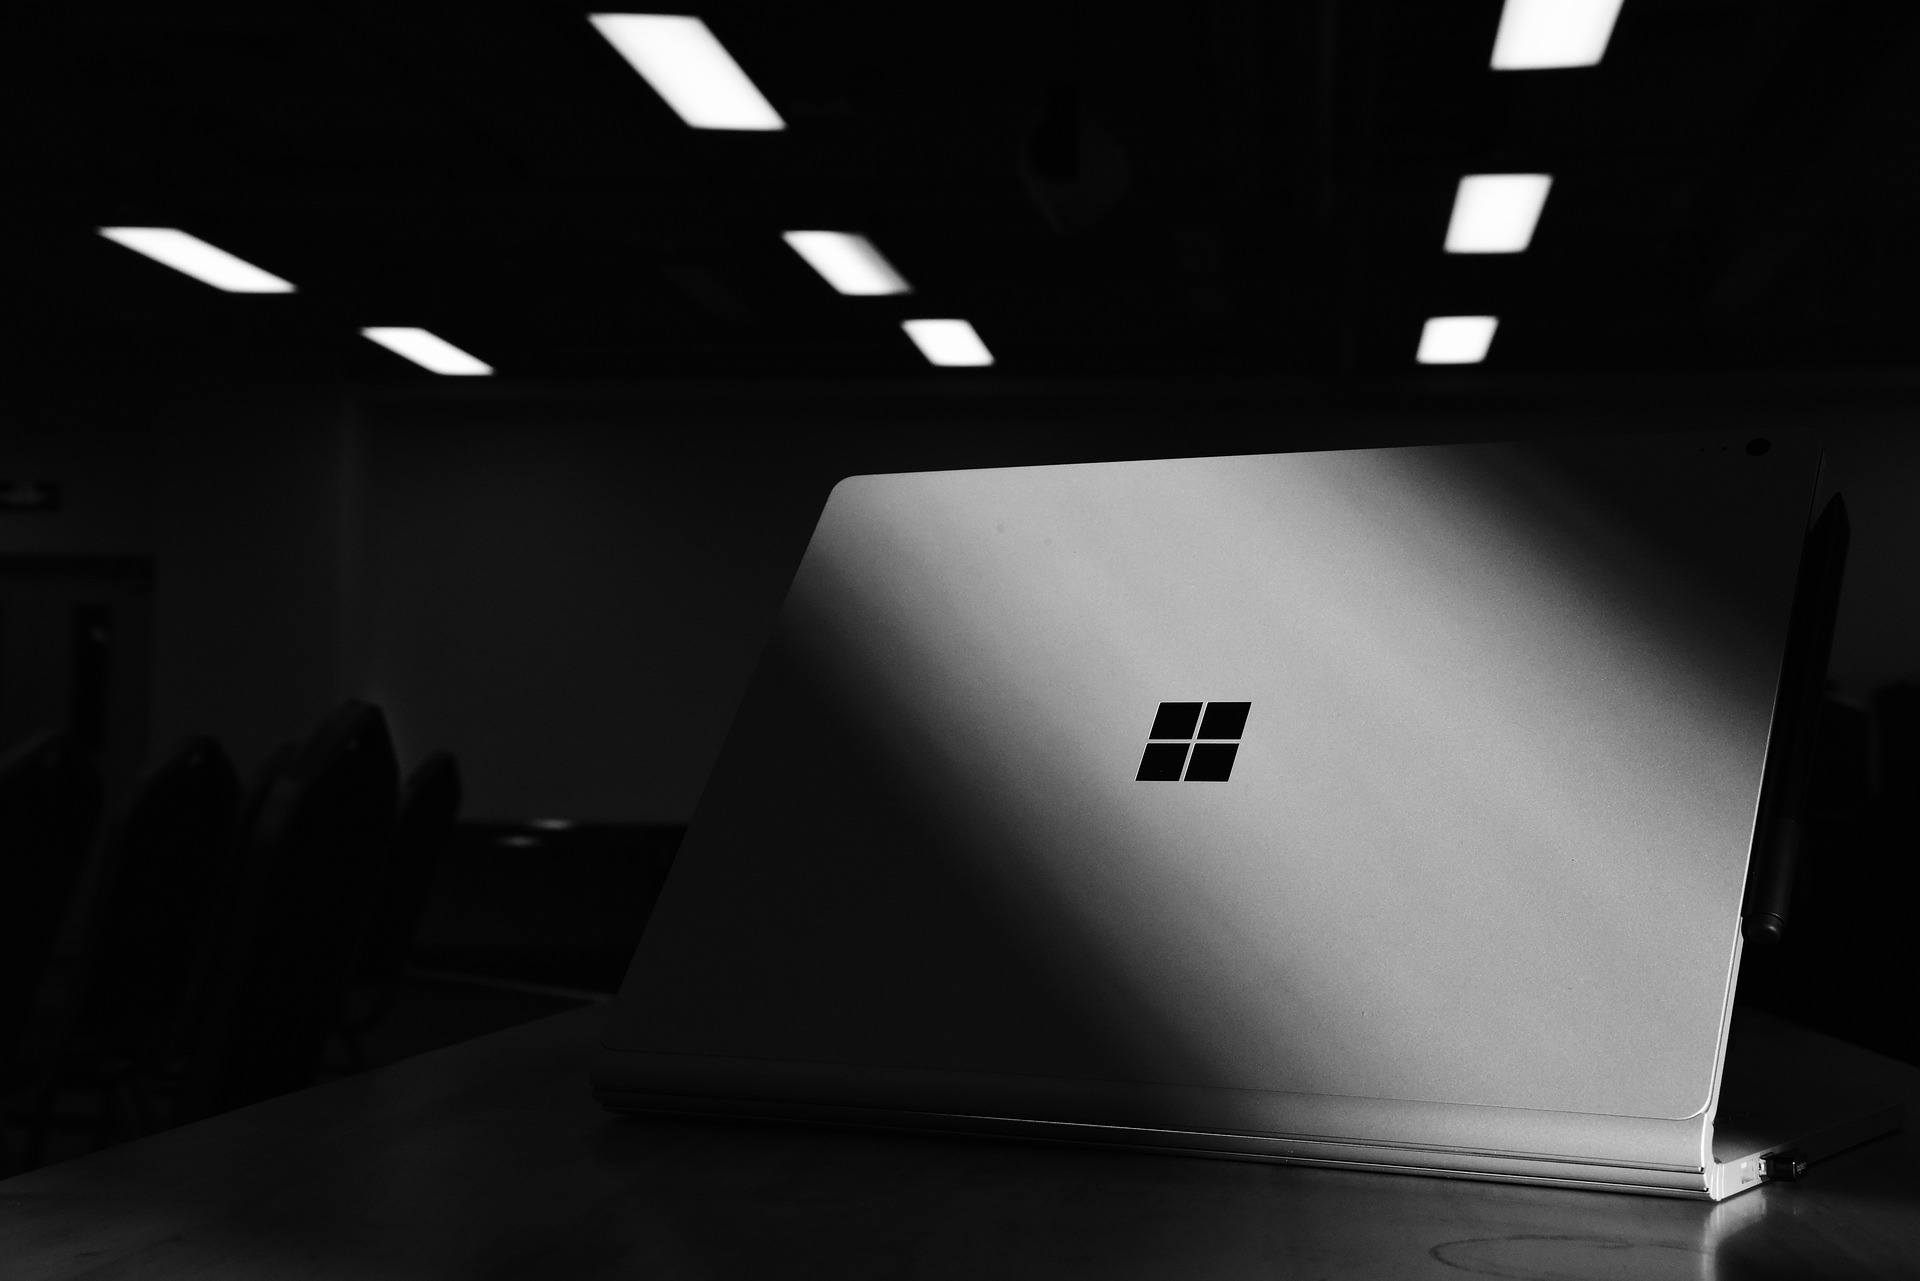 Windows 8.1 Support - black and white image of a Windows laptop.